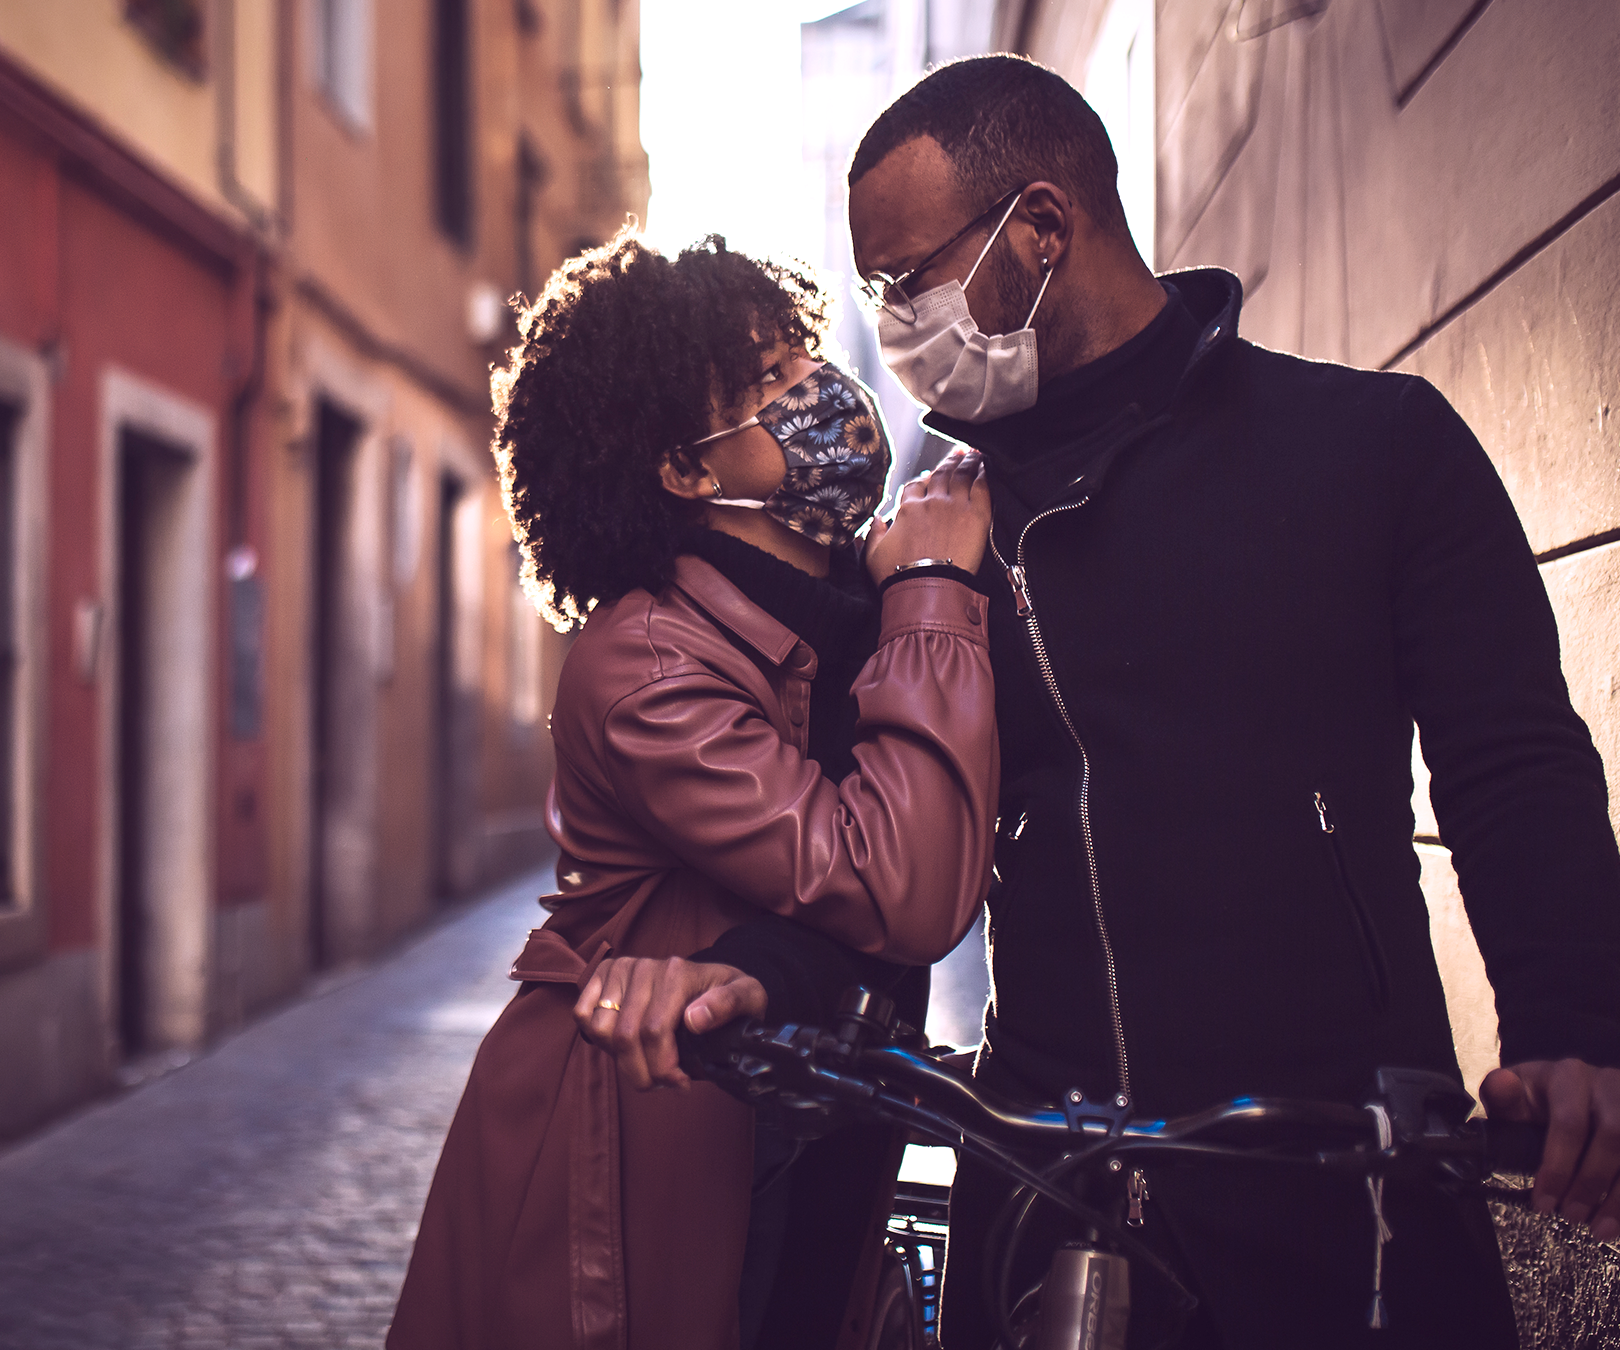 Finding Love During the Pandemic